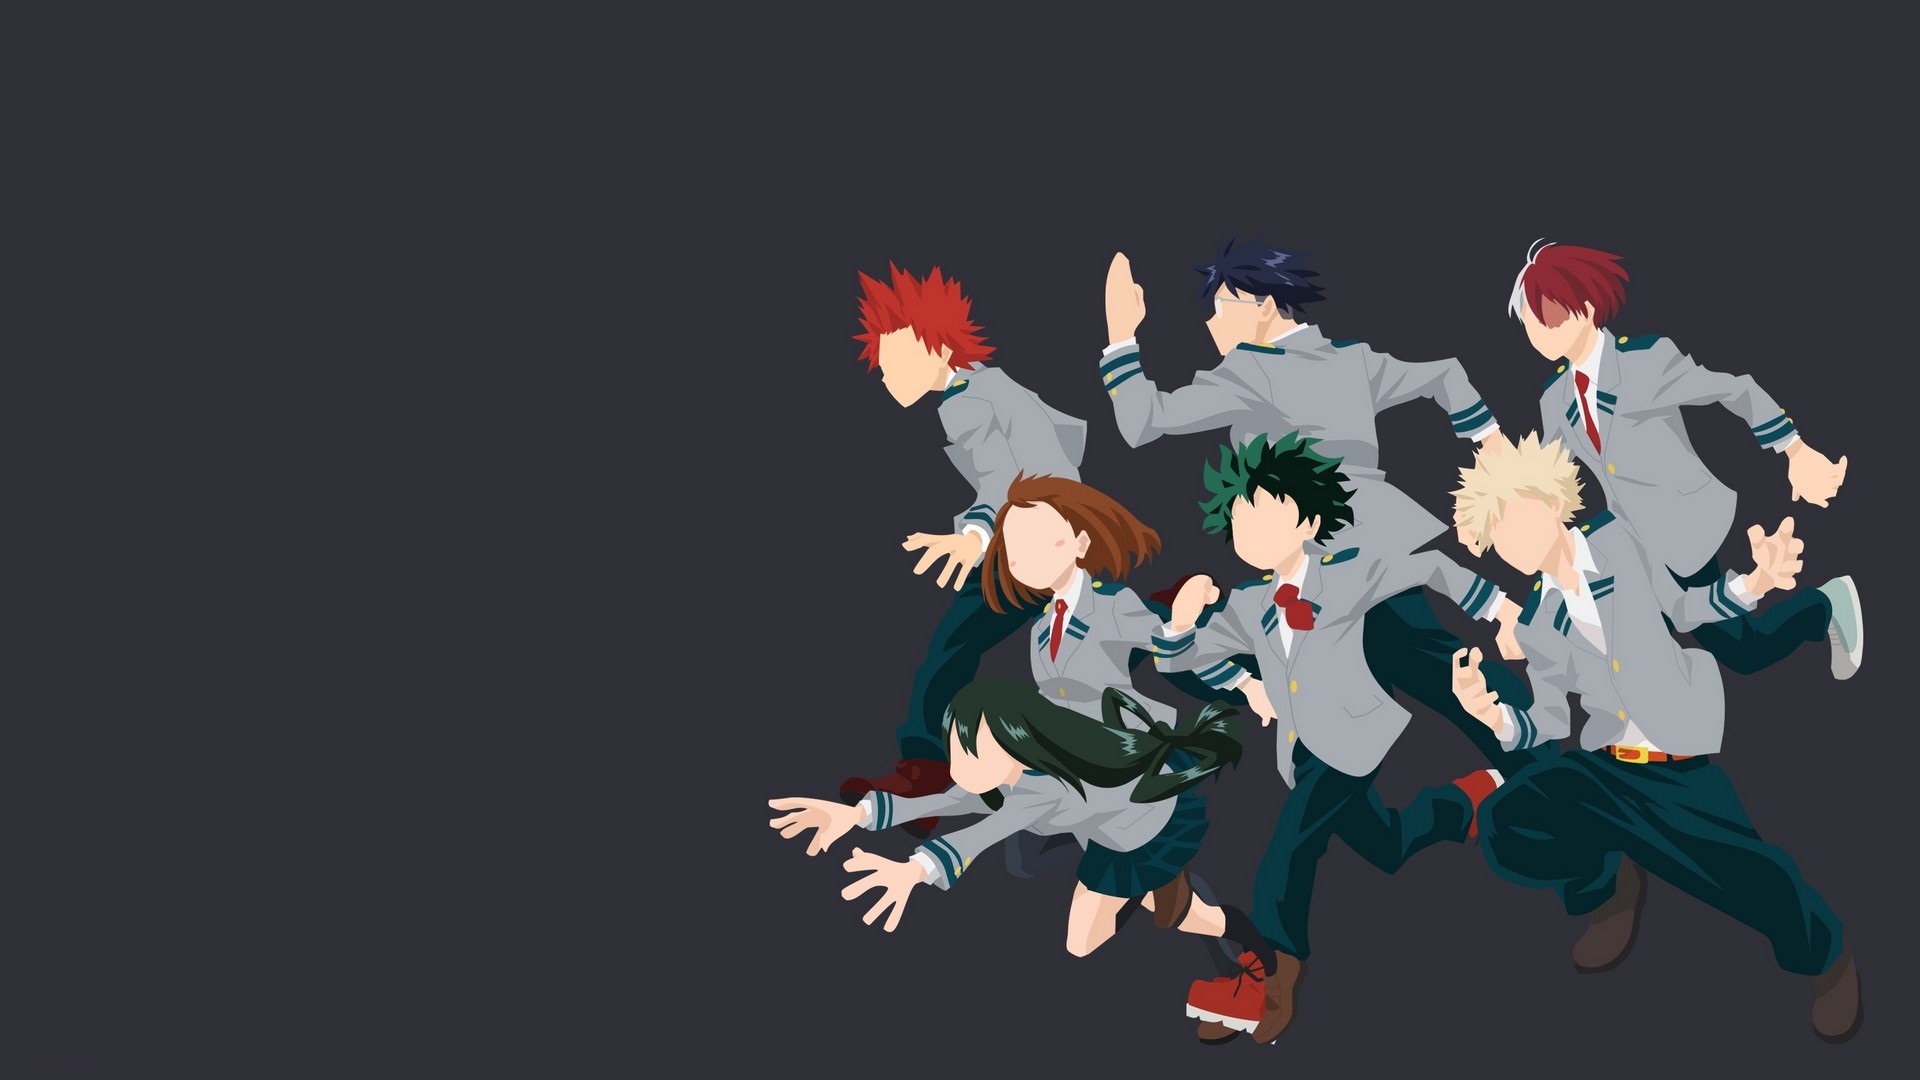 My Hero Academia Desktop Backgrounds HD with high-resolution 1920x1080 pixel. You can use this wallpaper for your Windows and Mac OS computers as well as your Android and iPhone smartphones